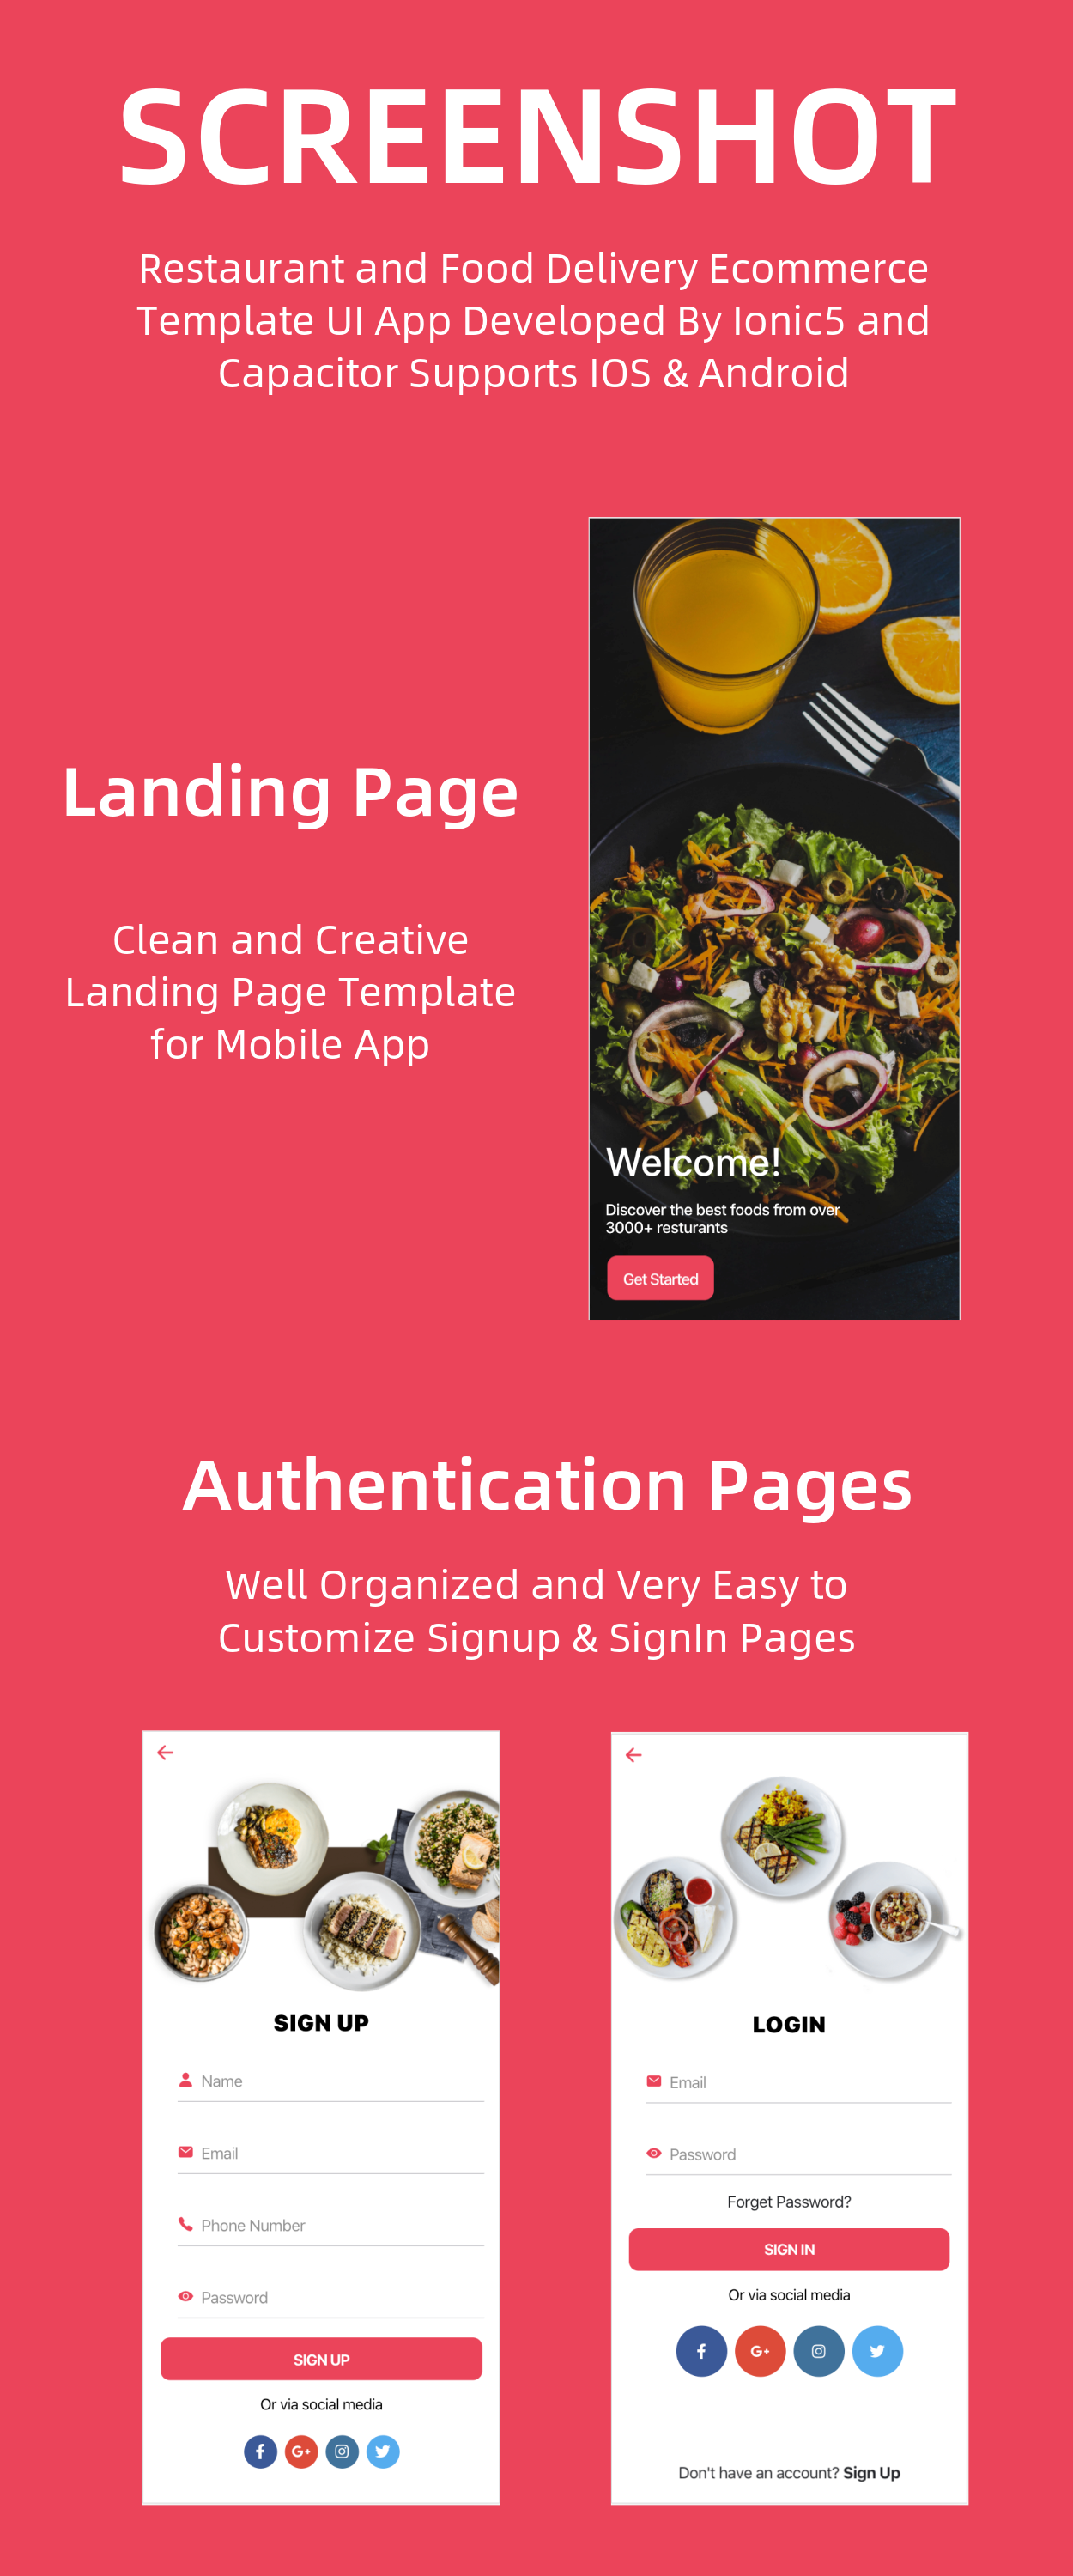 Restaurant and Food Delivery Ecommerce App (Ionic5 & Capacitor) Template UI - 4